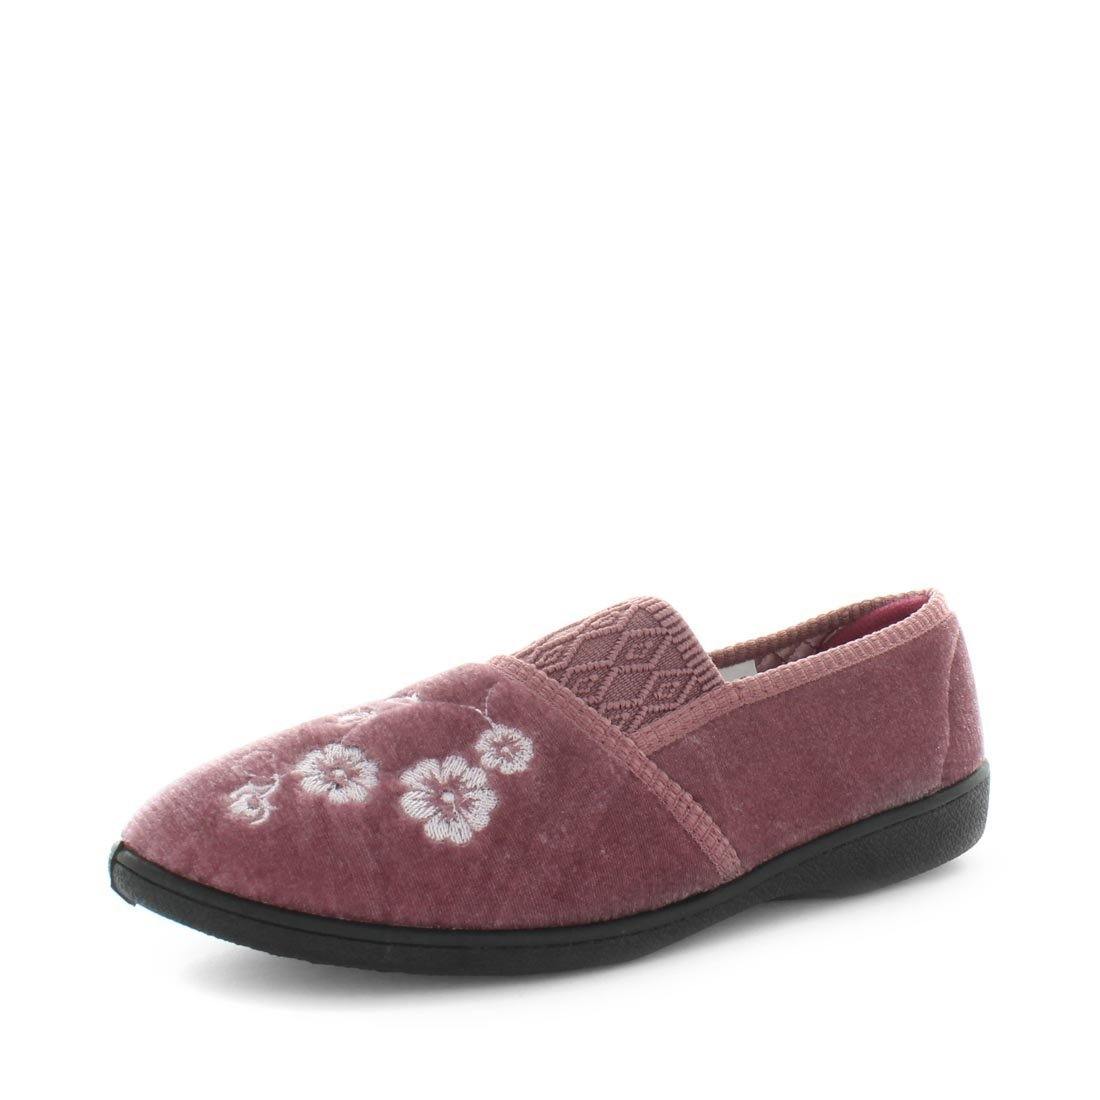 Elsah 3 by panda slippers - comfort steady womens slippers with floral printed deigned upper. comfort footbed and steady sole - womens slippers - indoor slippers - outdoor slippers - panda slippers